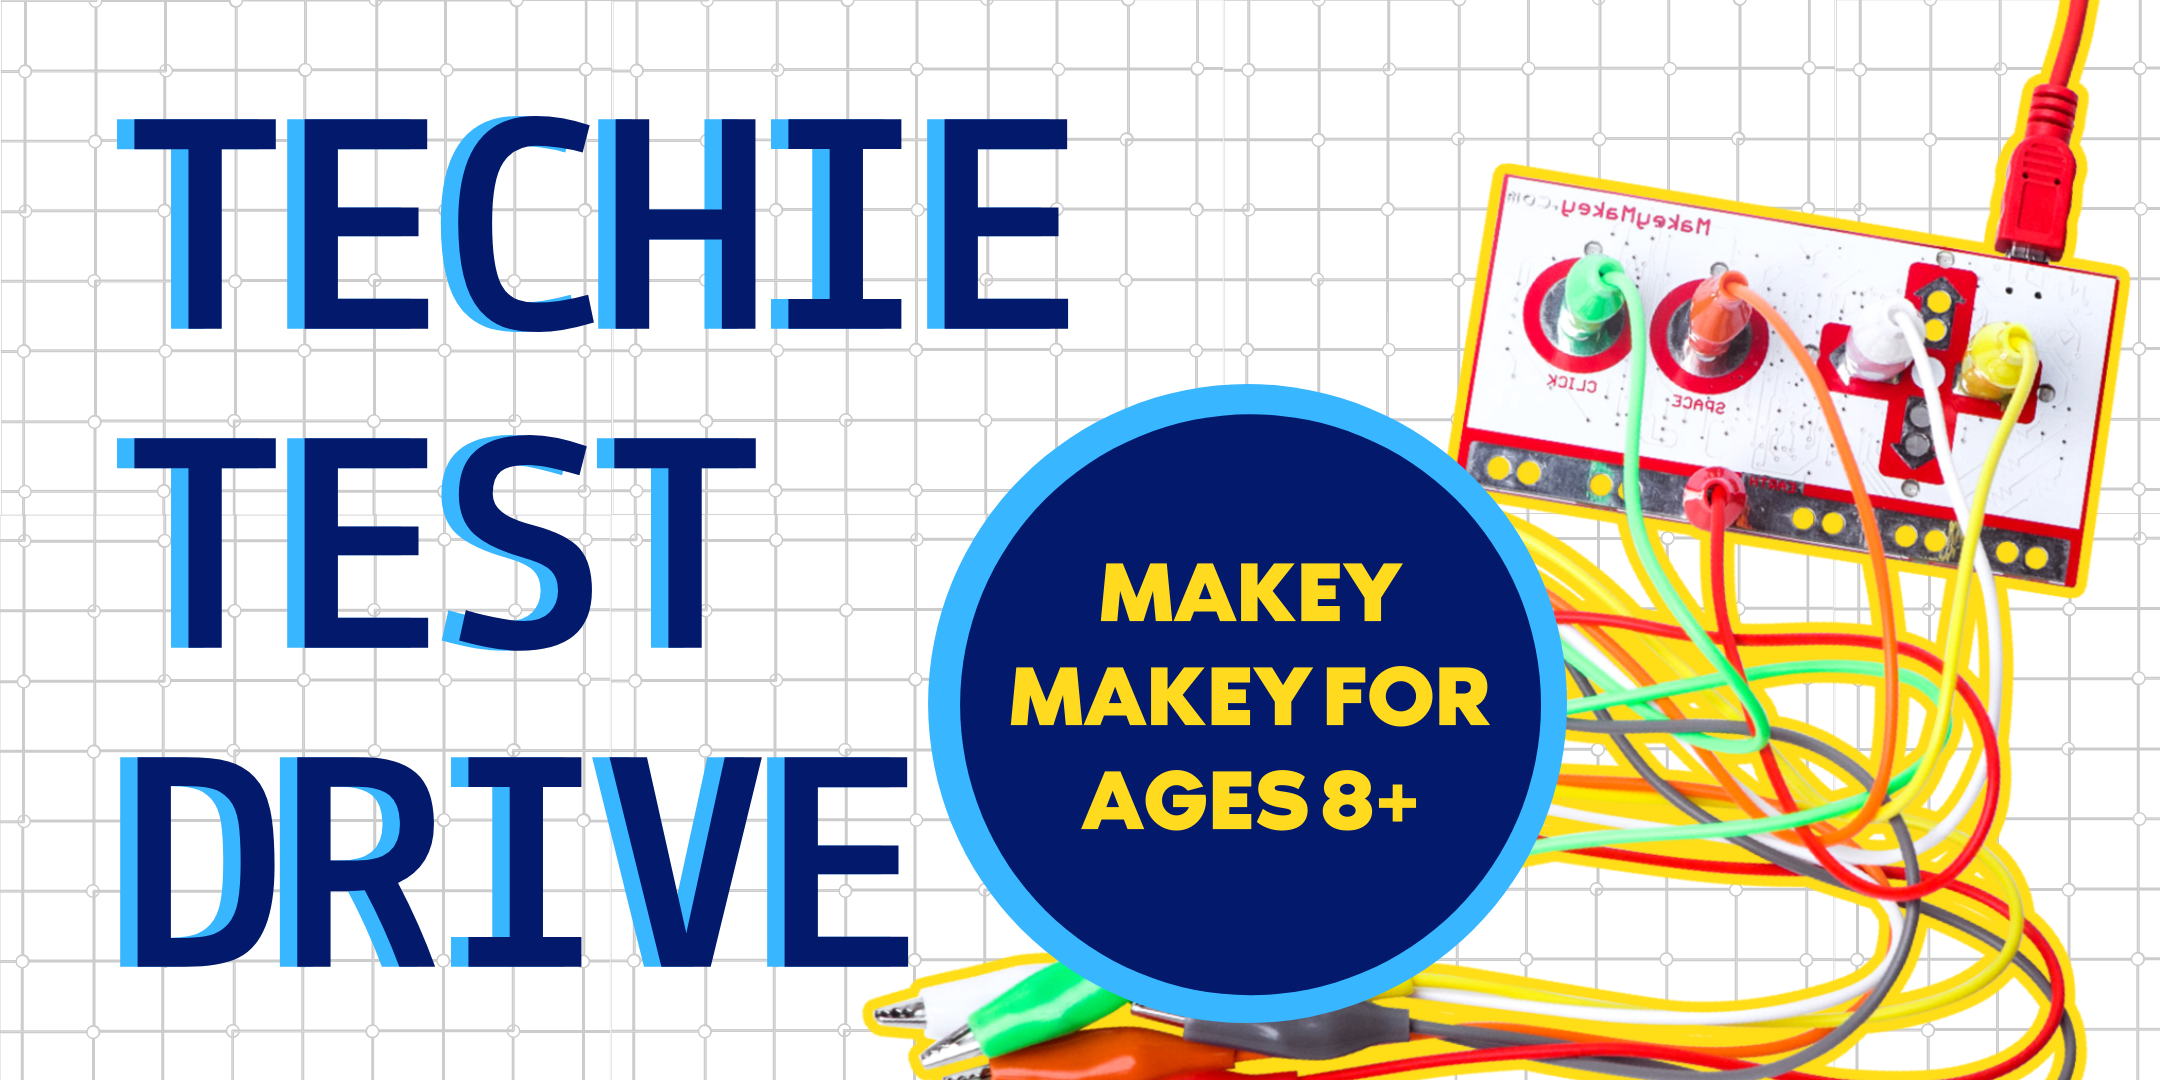 Techie Test Drive: Makey Makey event image